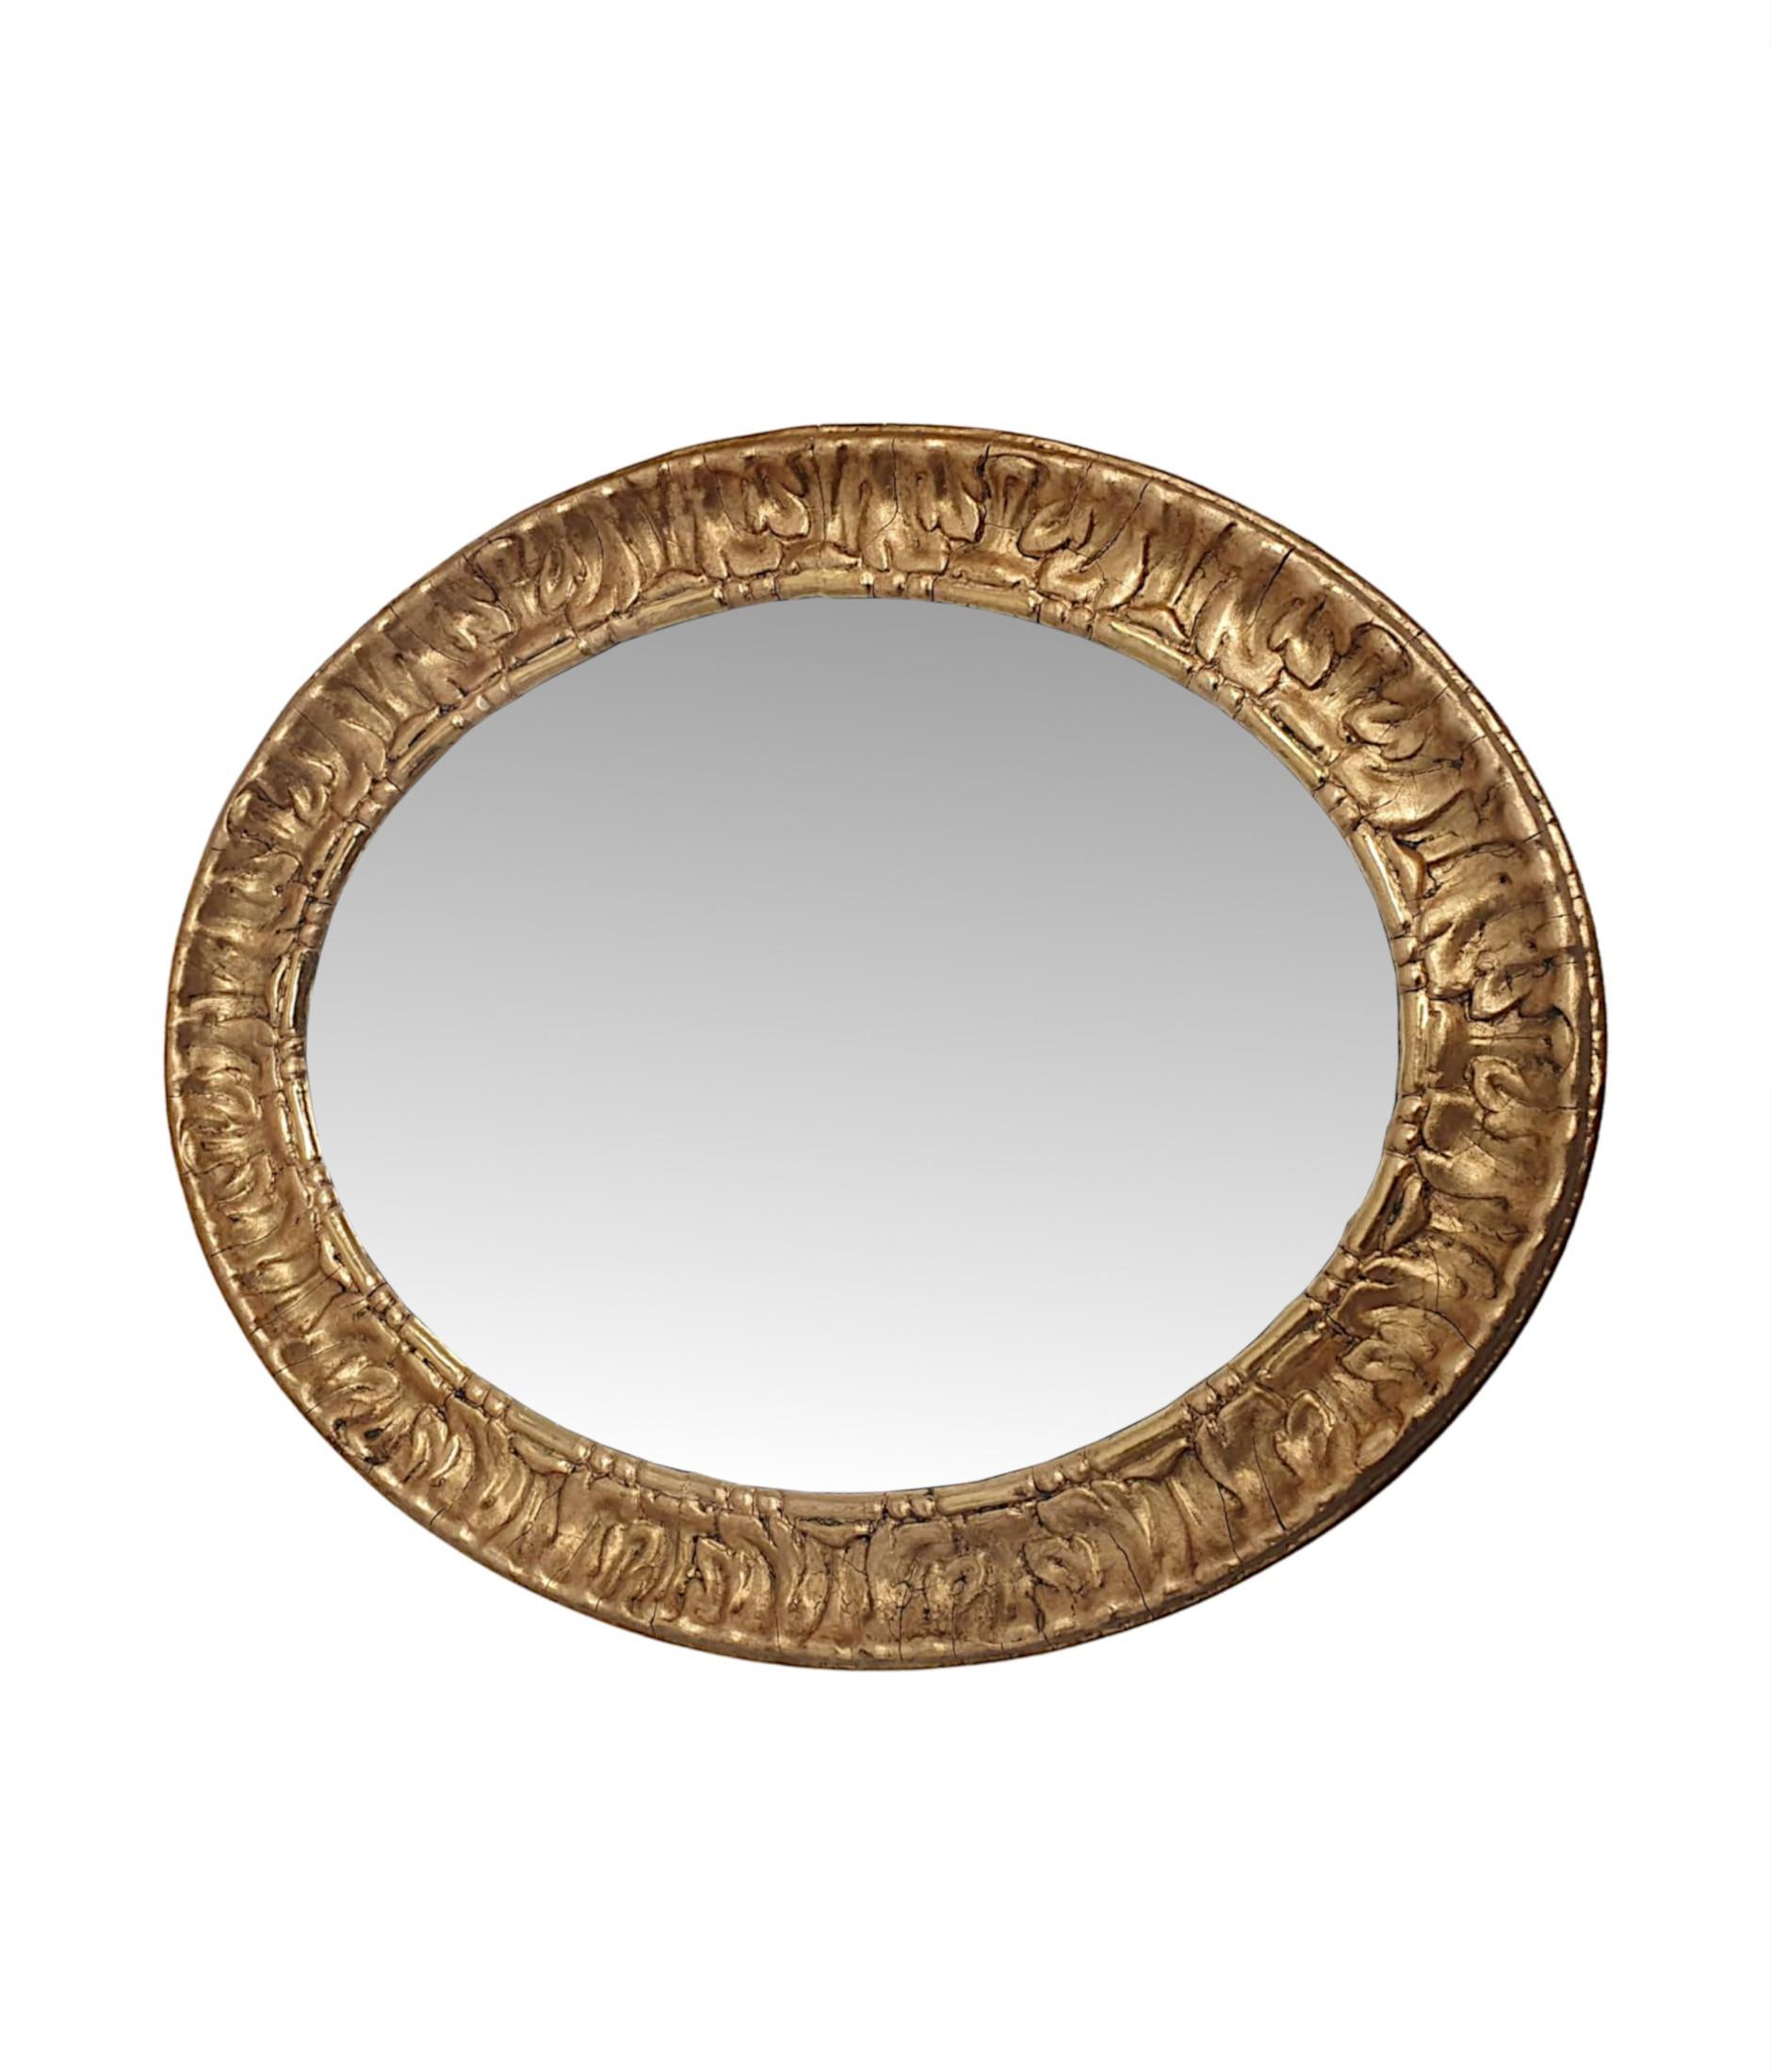 A lovely pair of 19th Century giltwood mirrors, finely hand carved, fully restored and of exceptional quality.  The bevelled mirror glass plate of oval form is set within a fabulous moulded giltwood frame with elegantly simple lozenge and bead